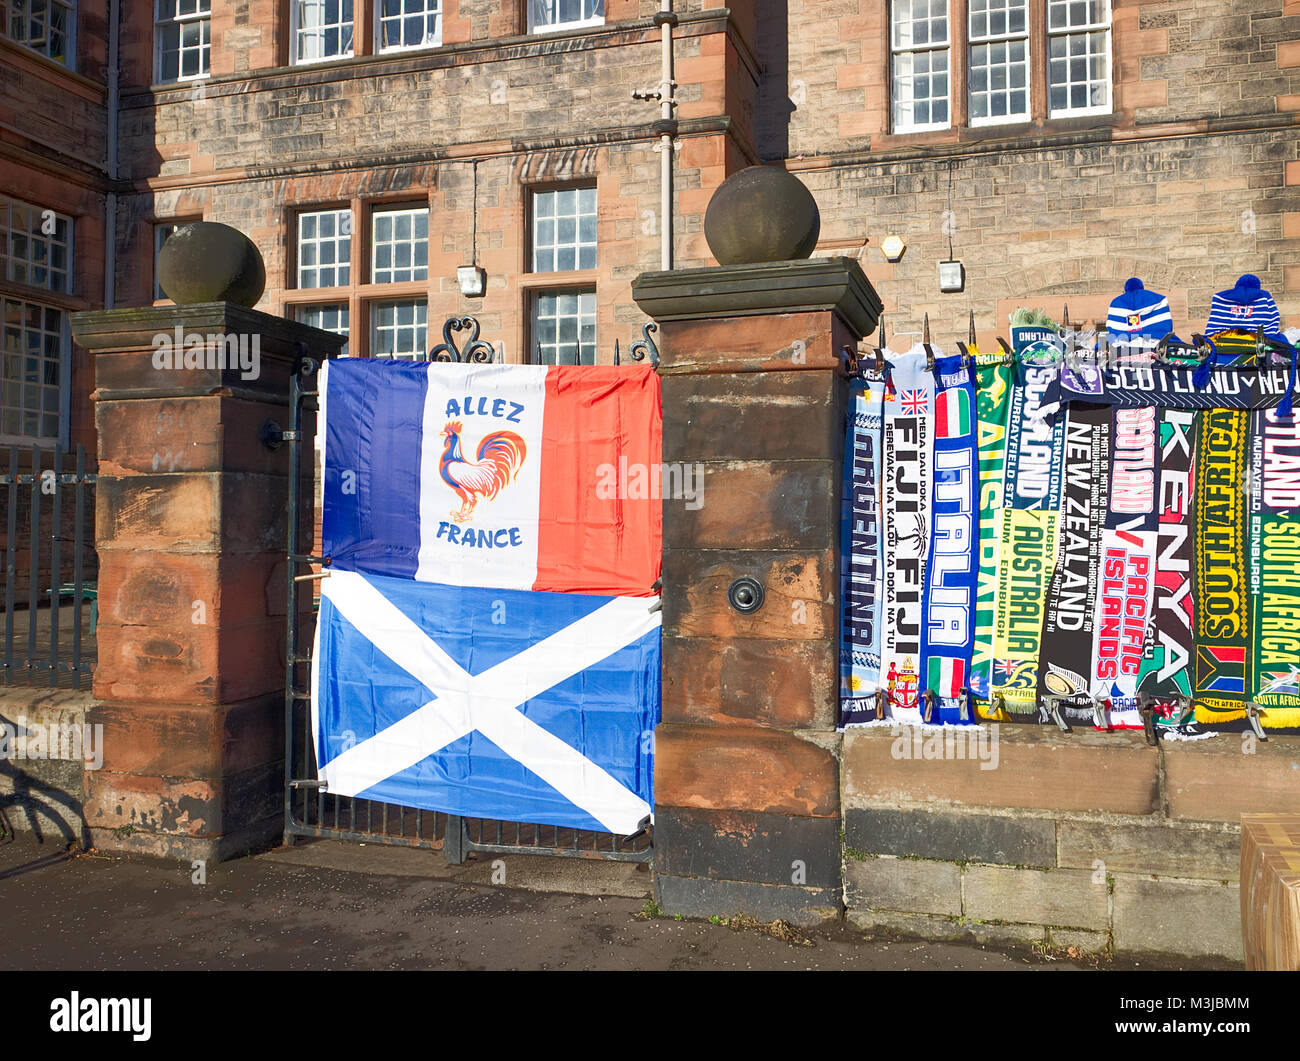 Edinburgh, Scotland, UK. 11th February, 2018. RBS 6 Nations - Scotland, France, Edinburgh, Scotland UK. Scarves, hats and flags being sold ahead of the Scotland-France Test Match (11th February 2018). Credit: Thomas Feige/Alamy Live News Stock Photo